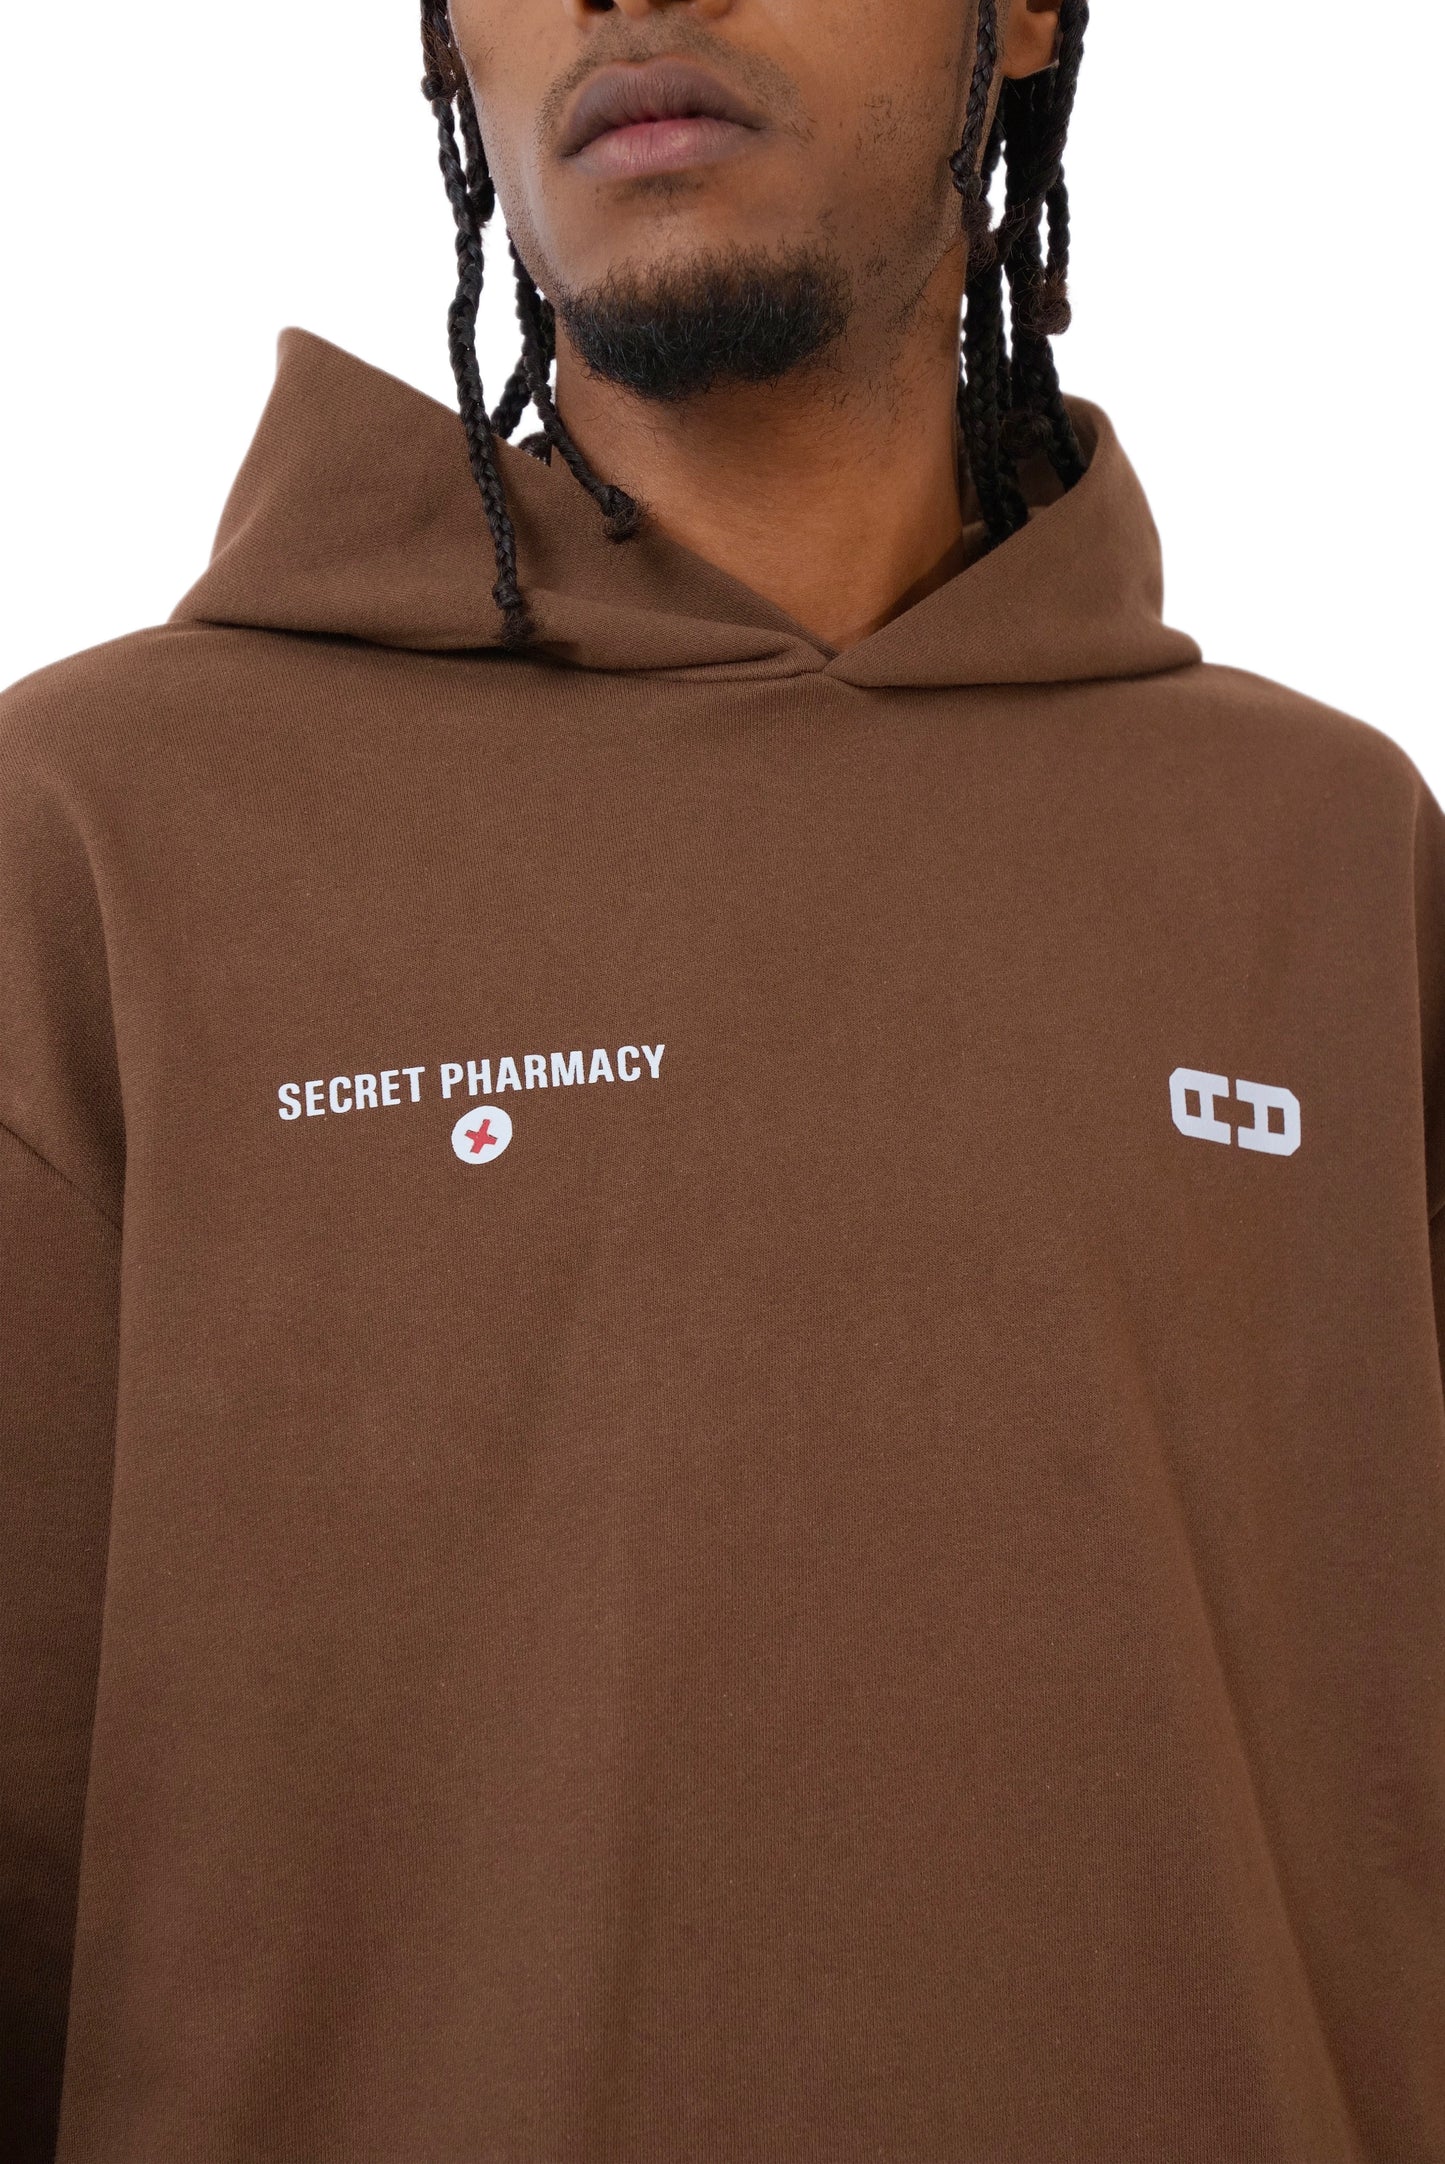 SADNESS RESCUE - BROWN HOODIE